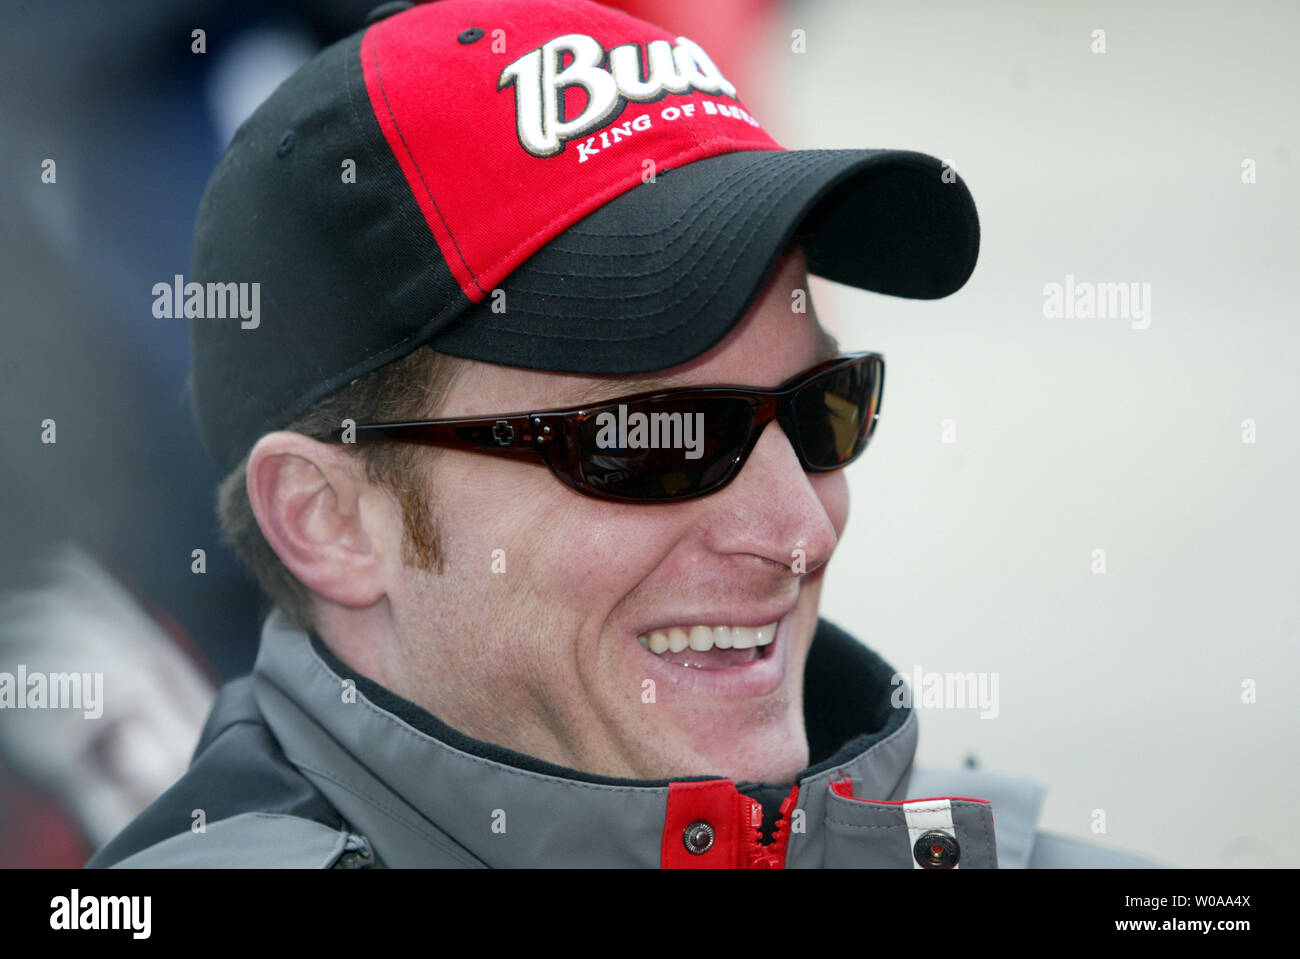 NASCAR driver Dale Earnhardt Jr. prior to the start of the Food City 500 at the Bristol Motor Speedway in Bristol, TN on March 26, 2006. (UPI Photo/Nell Redmond) Stock Photo